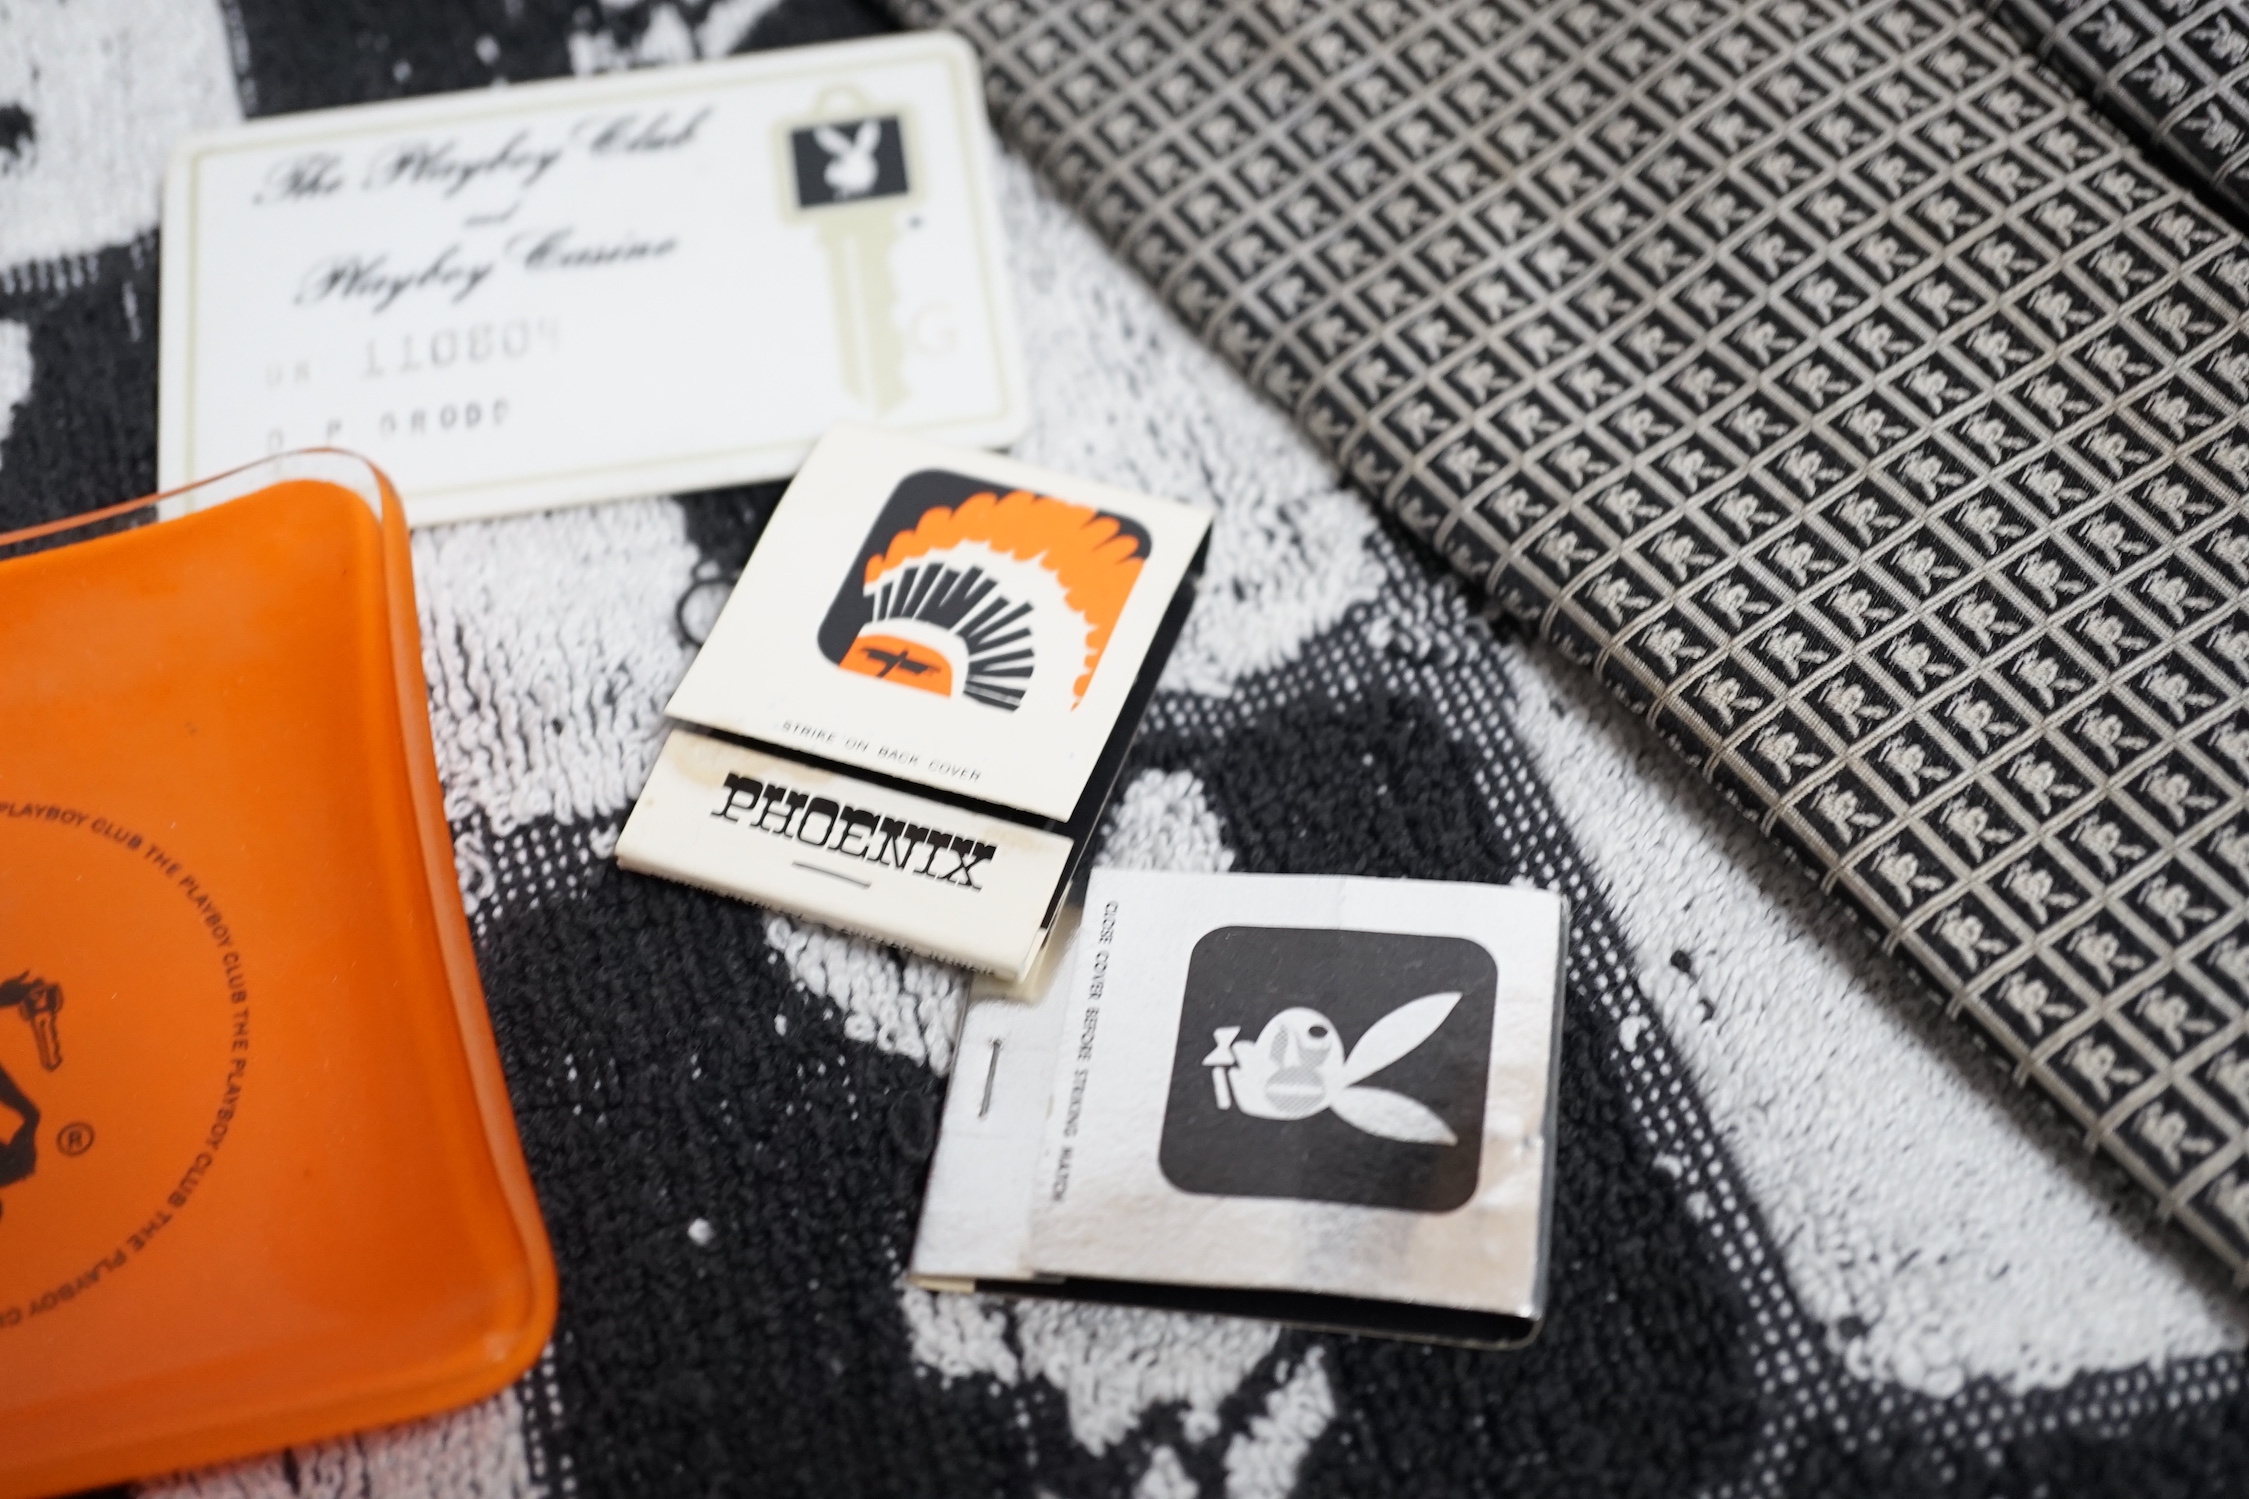 Playboy memorabilia: tie, an ashtray, two packs of matches, towel, a pair of cuff-links, membership card